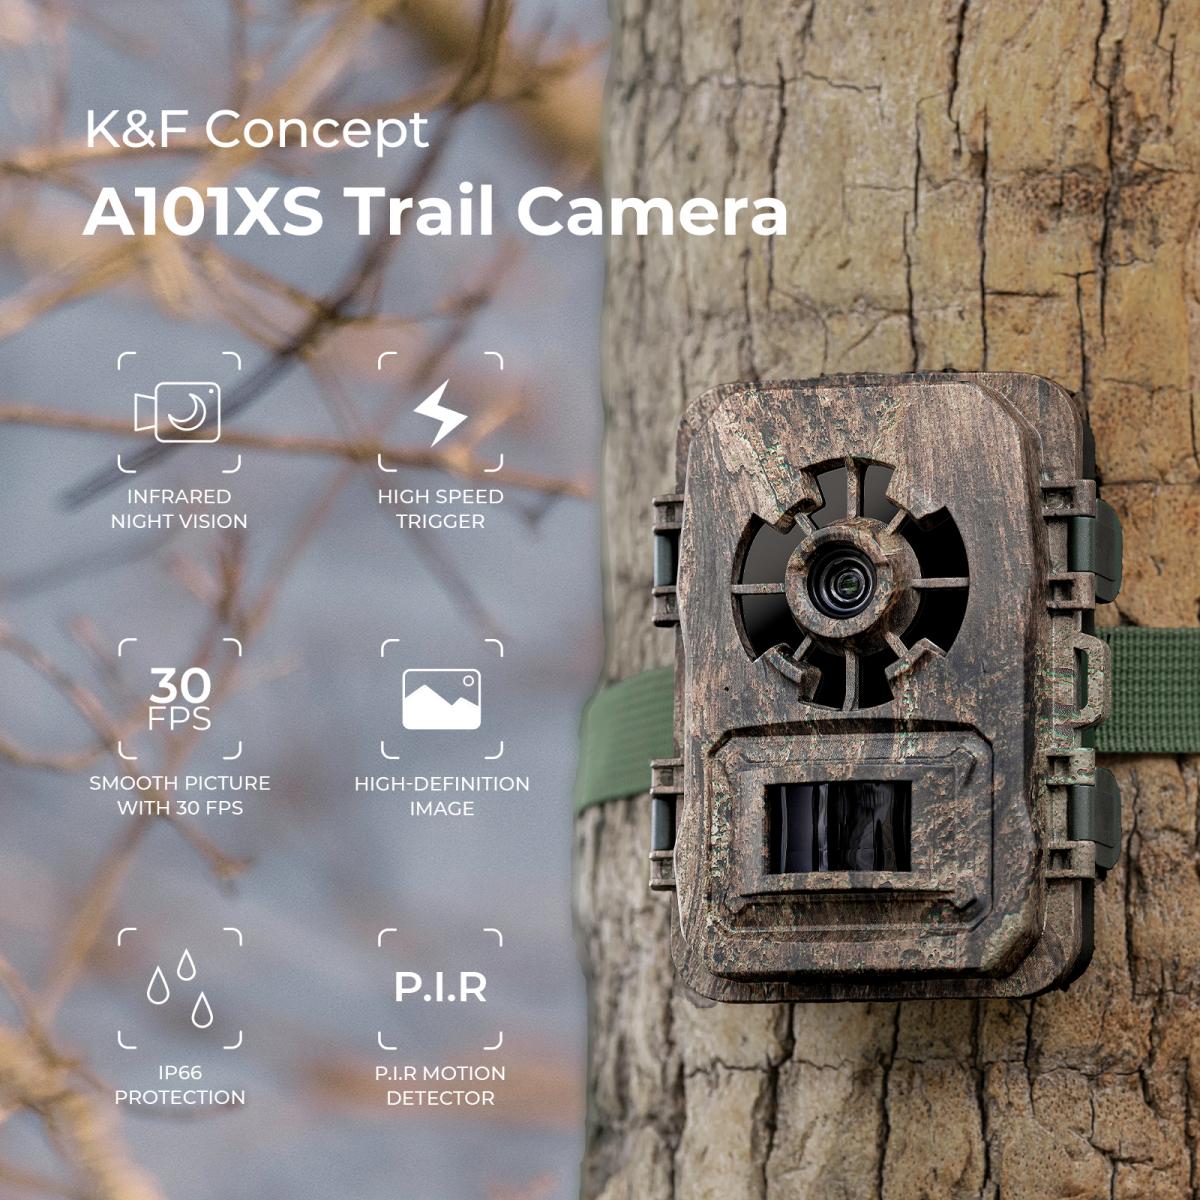 Product Image of K&F Concept Wildlife security Trail Camera, 24MP photos & 1296P/30fps video with 2 inch screen - dead wood